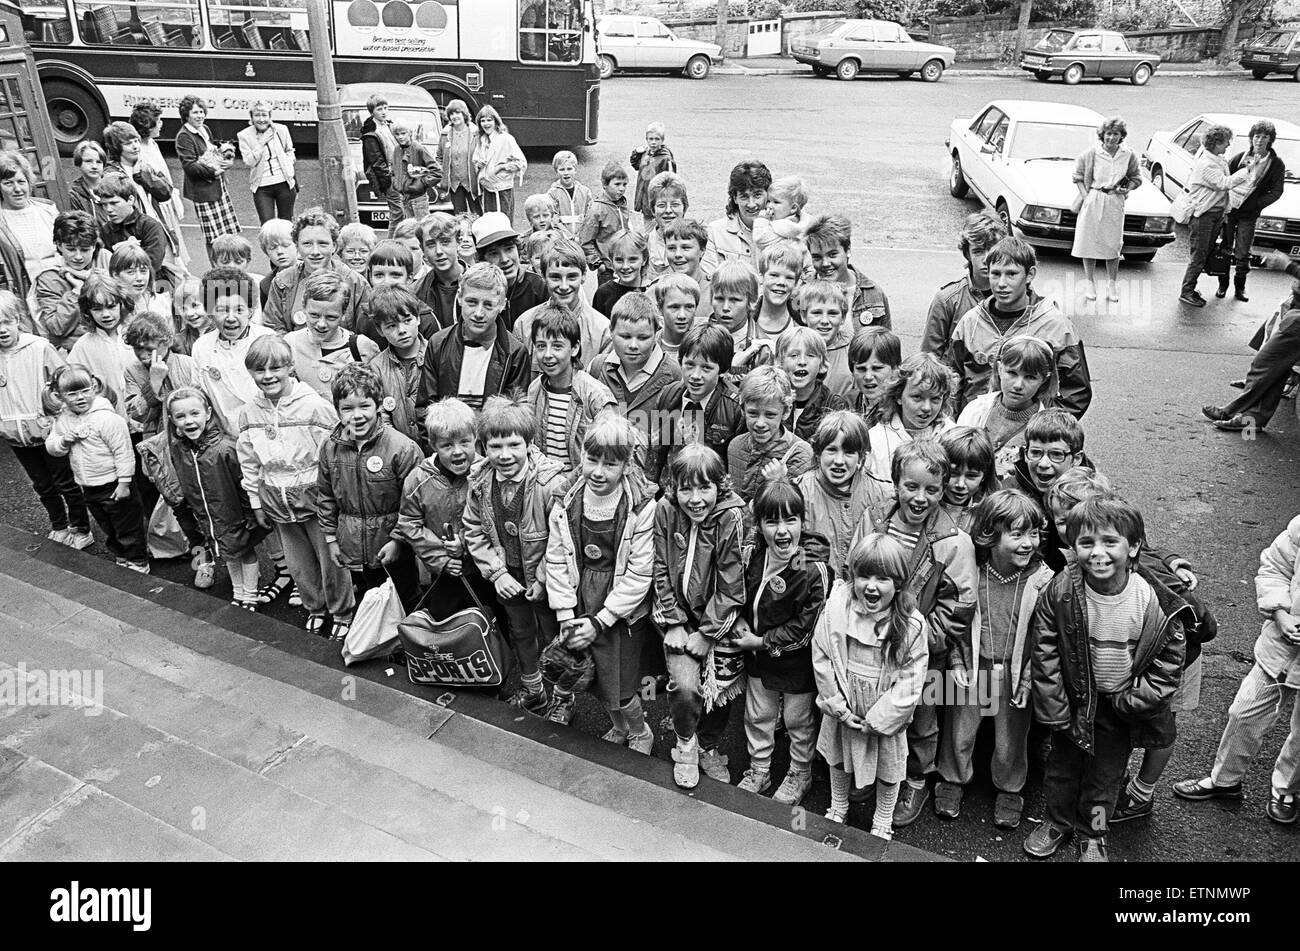 Some 90 children ready to set off on a trip to Lightwater Valley.  The event was organized by Cambridge road baths and Huddersfield sports centre, and as part of the annual summer programme run by Kirklees Leisure services indoor division.  A model making competition and BMX demonstrations are also planned. 7th August 1985. Stock Photo